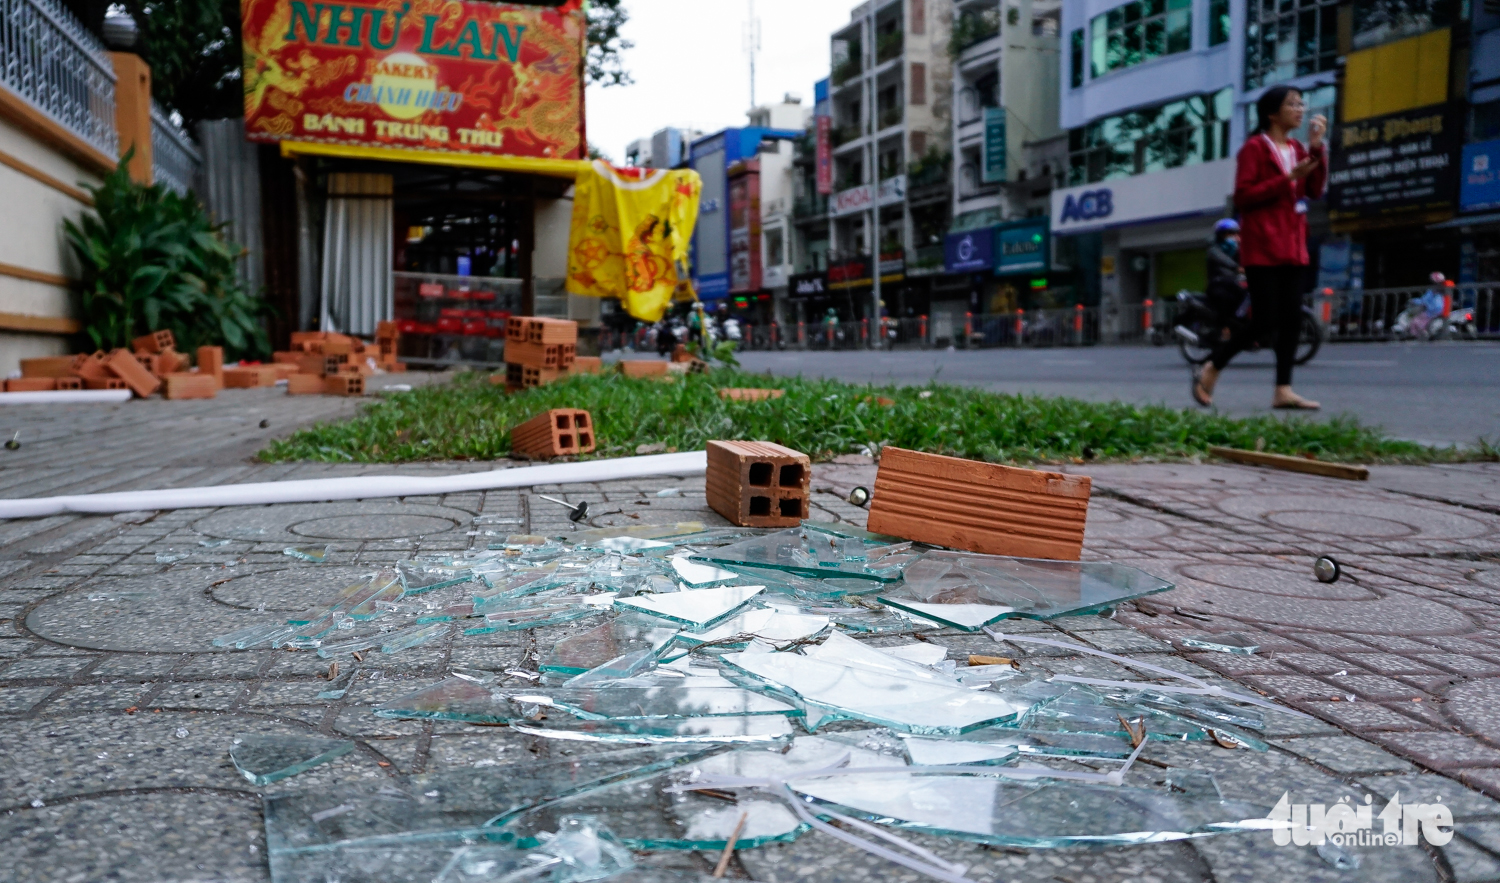 Shattered glass is seen on the sidewalk near a mooncake stand. Photo: Tuoi Tre